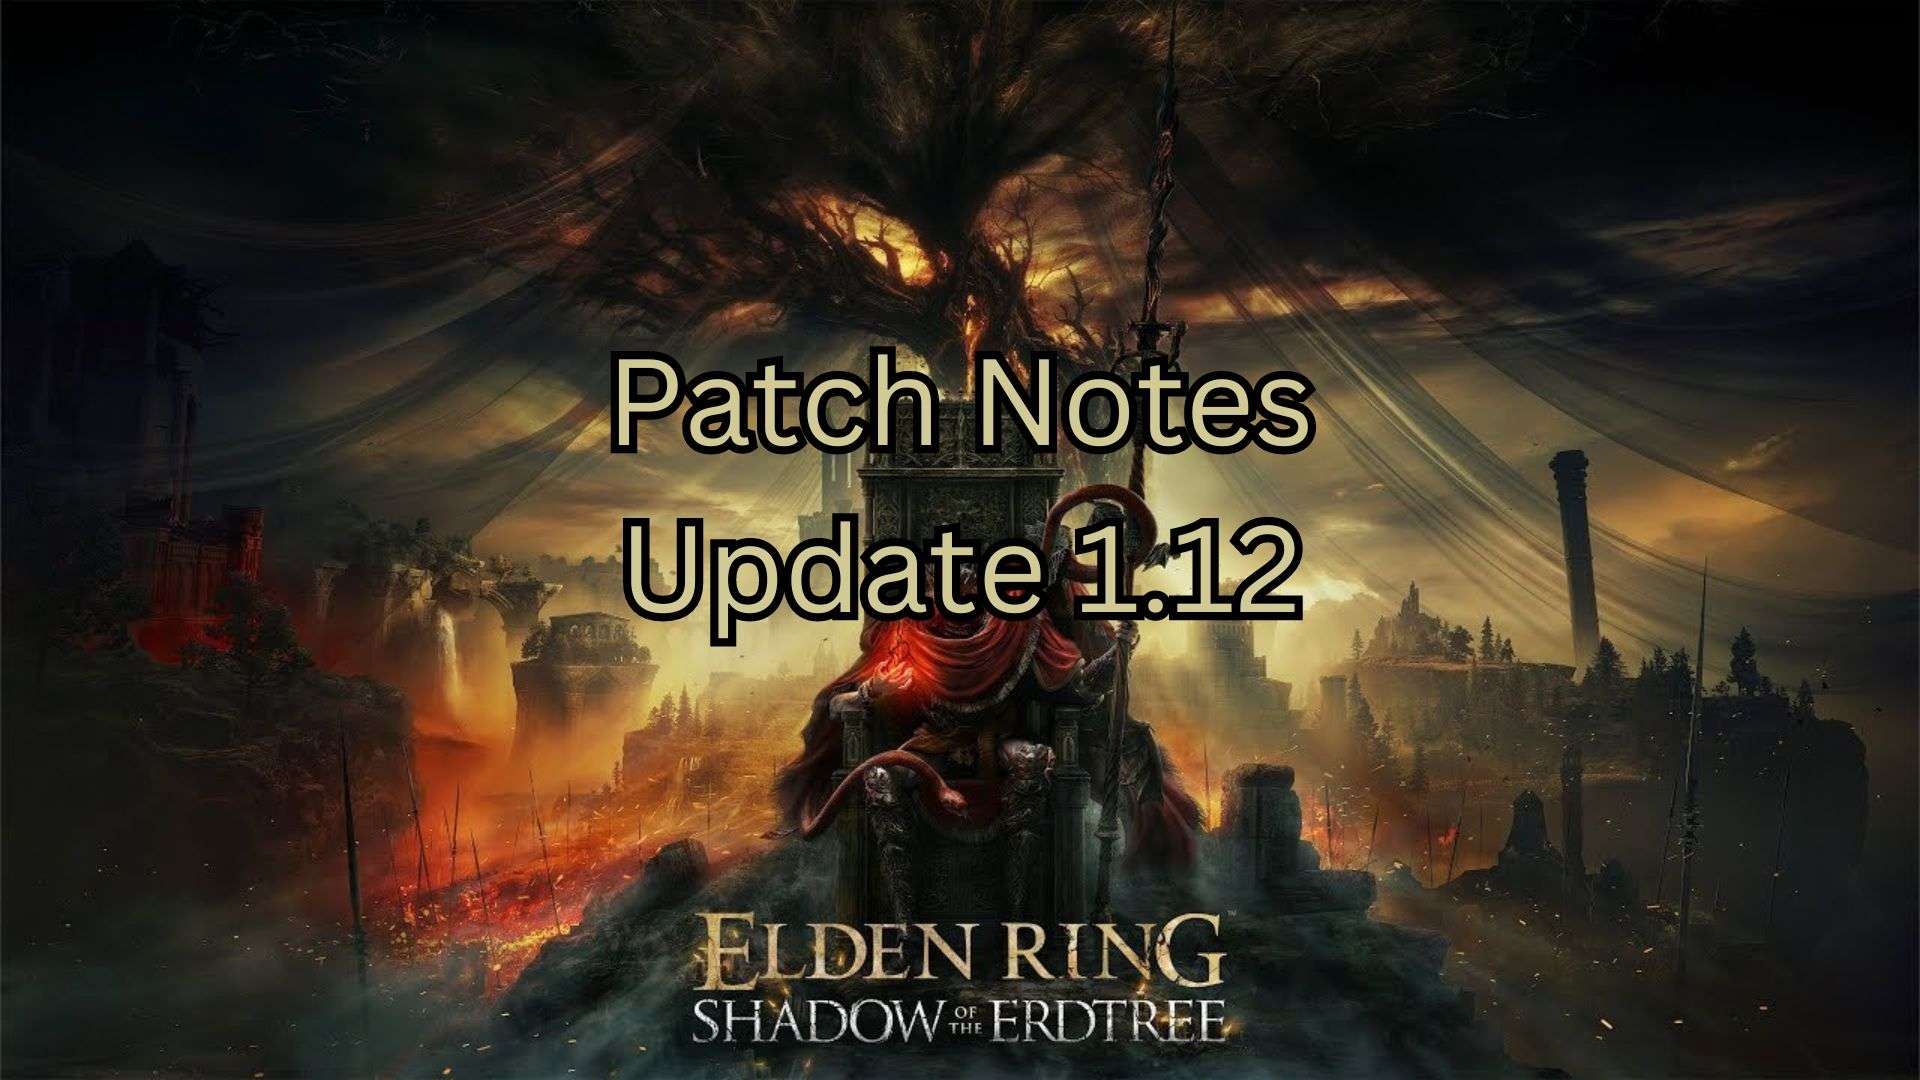 Elden Ring Update 1.12 Dropping Today Ahead of Shadow of the Erdtree